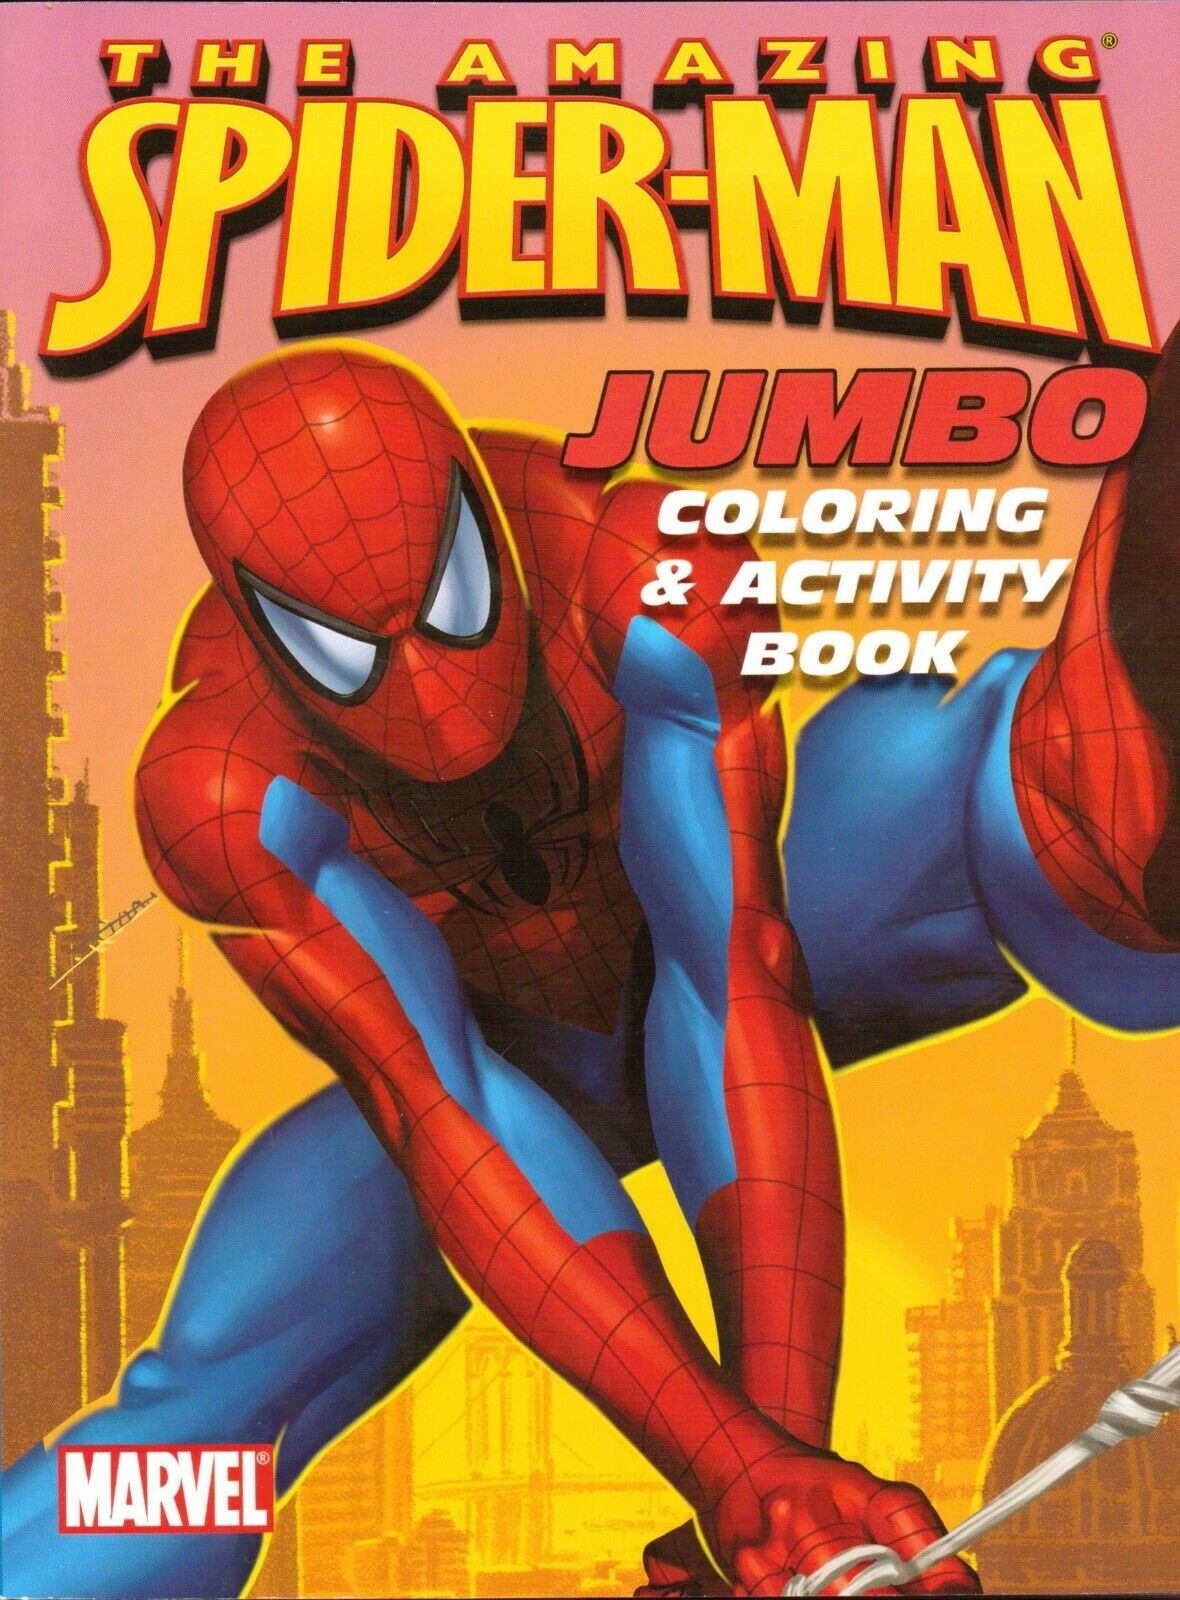 Spider-Man Jumbo Coloring & Activity Book - Assorted